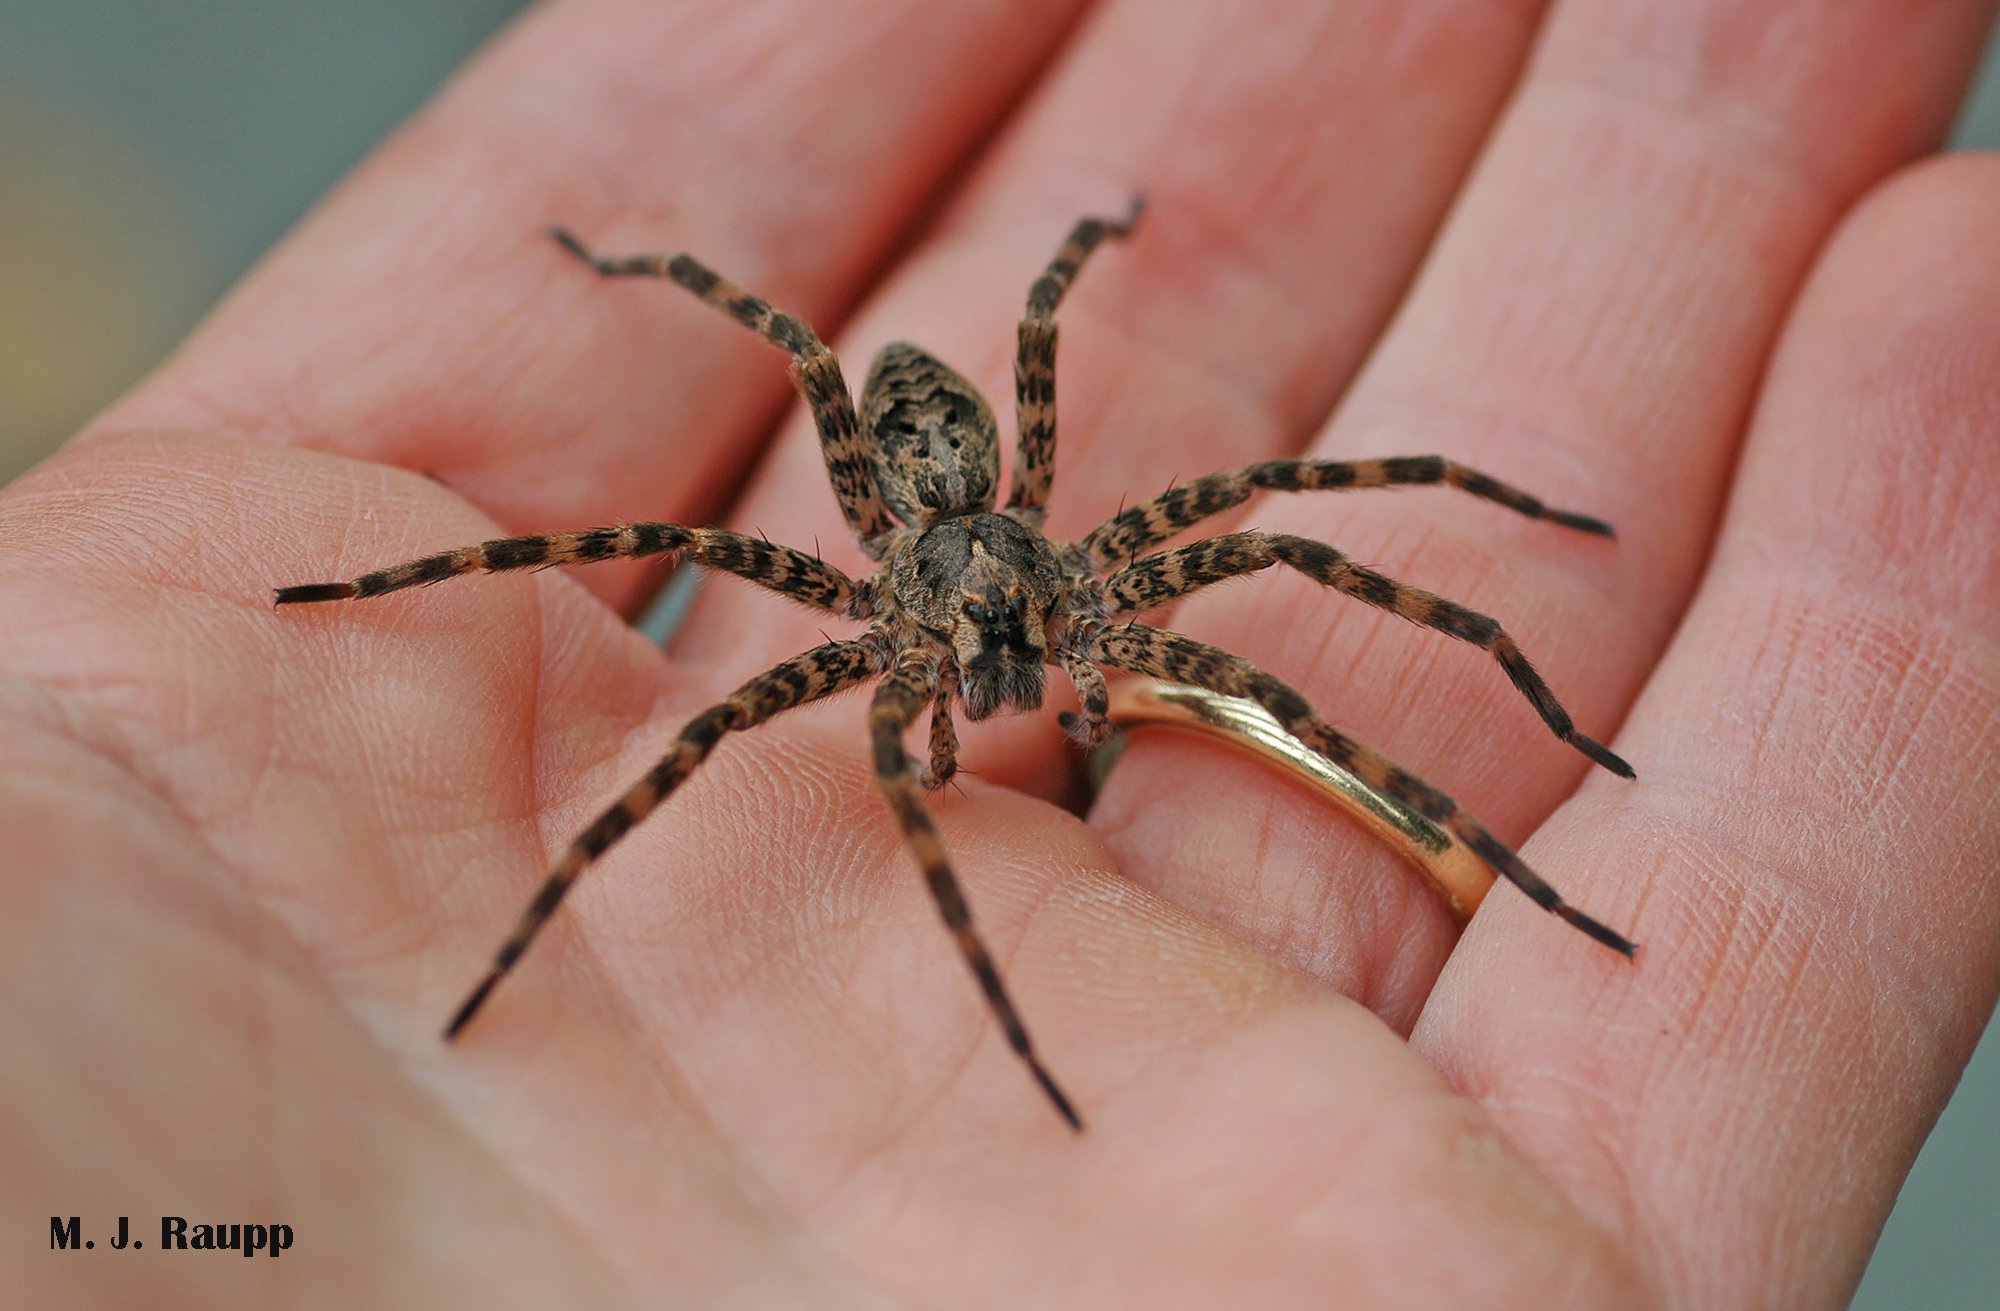 From the Bug of the Week Mailbag: Who's that big spider hanging